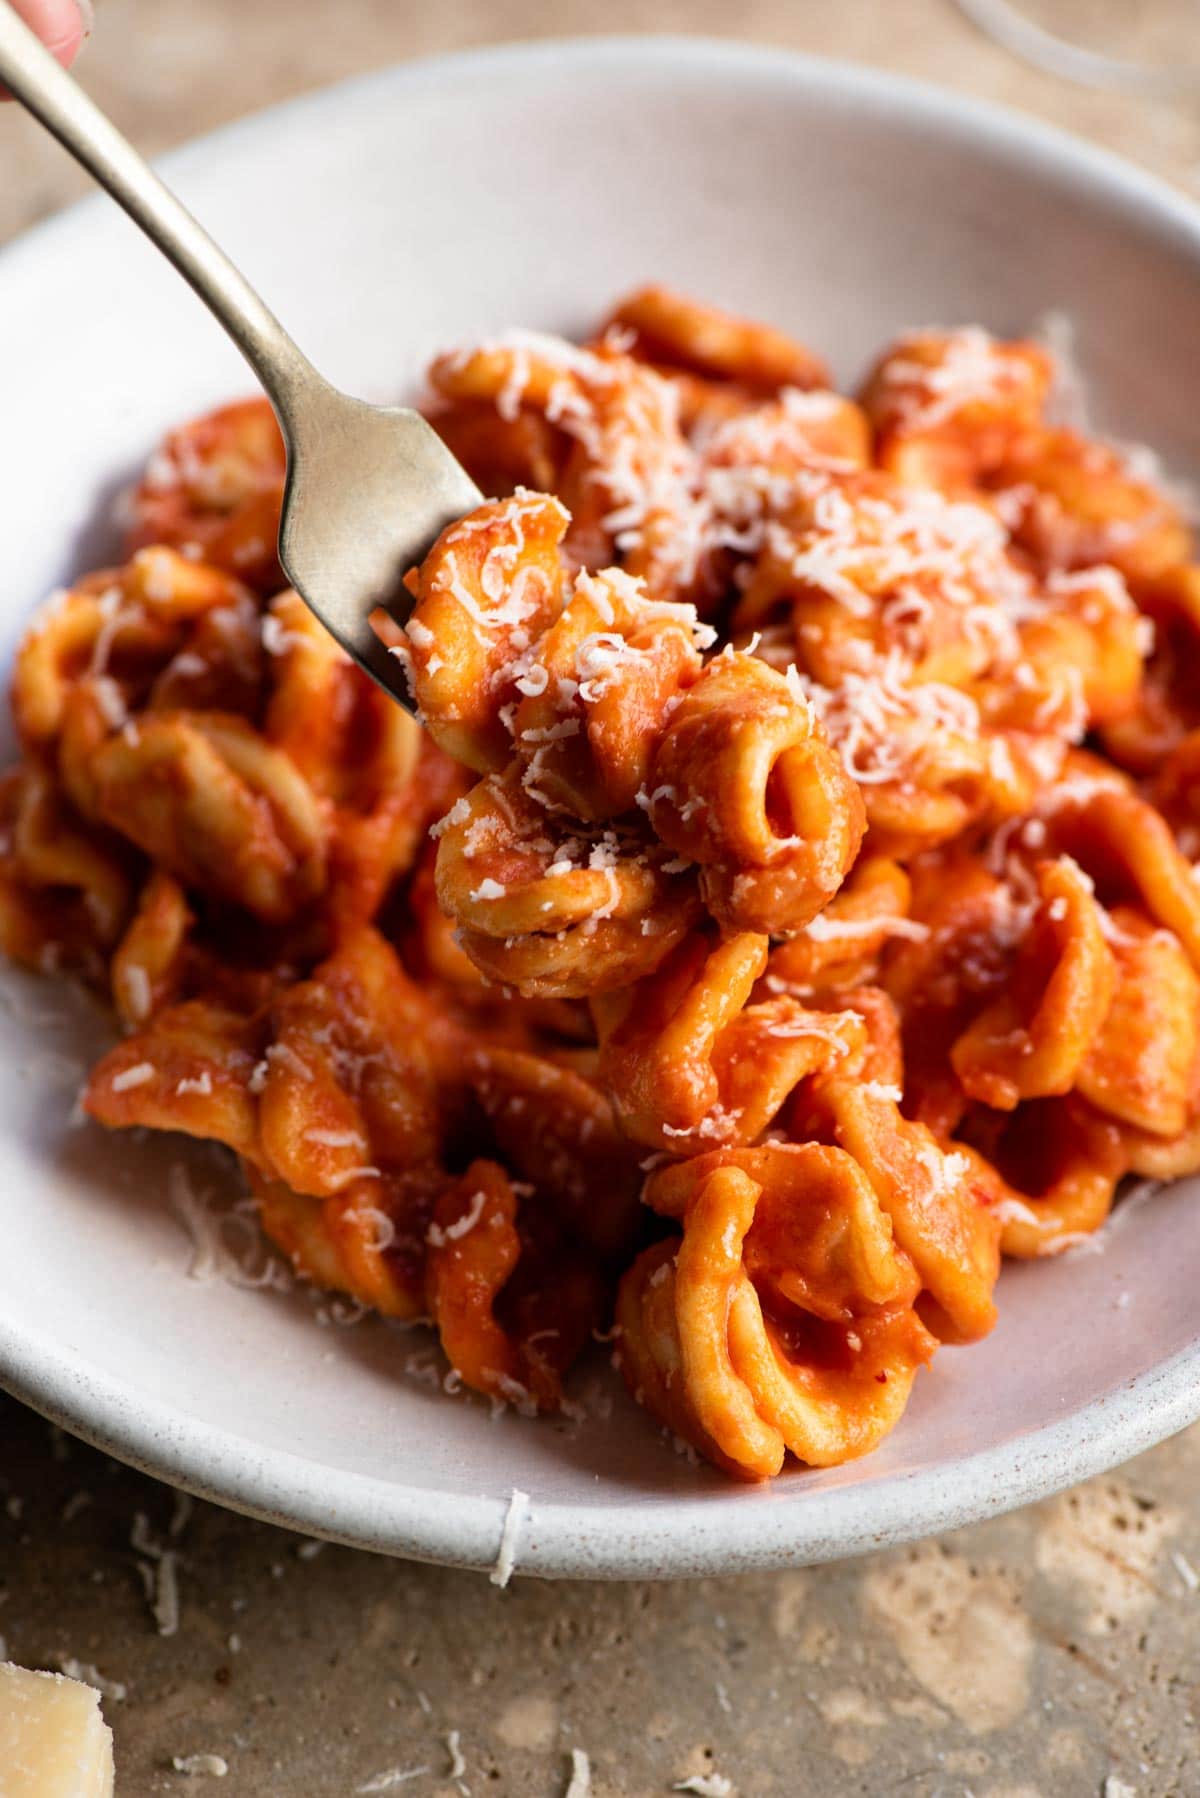 A close up of a fork picking up some orecchiette with a cream tomato Nduja sauce from a bowl